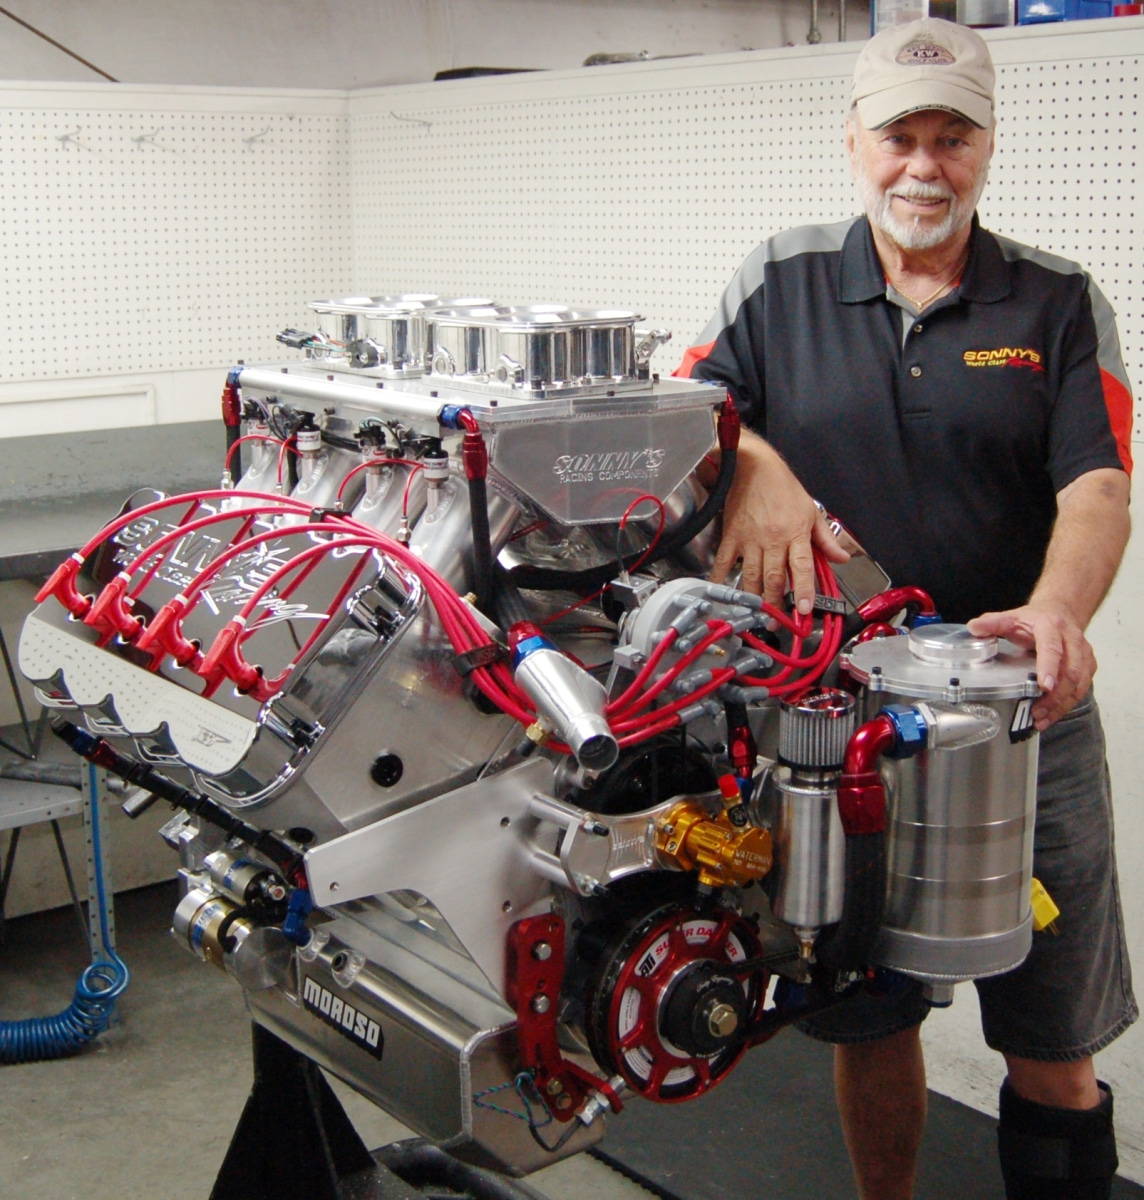 Sonny racing engines